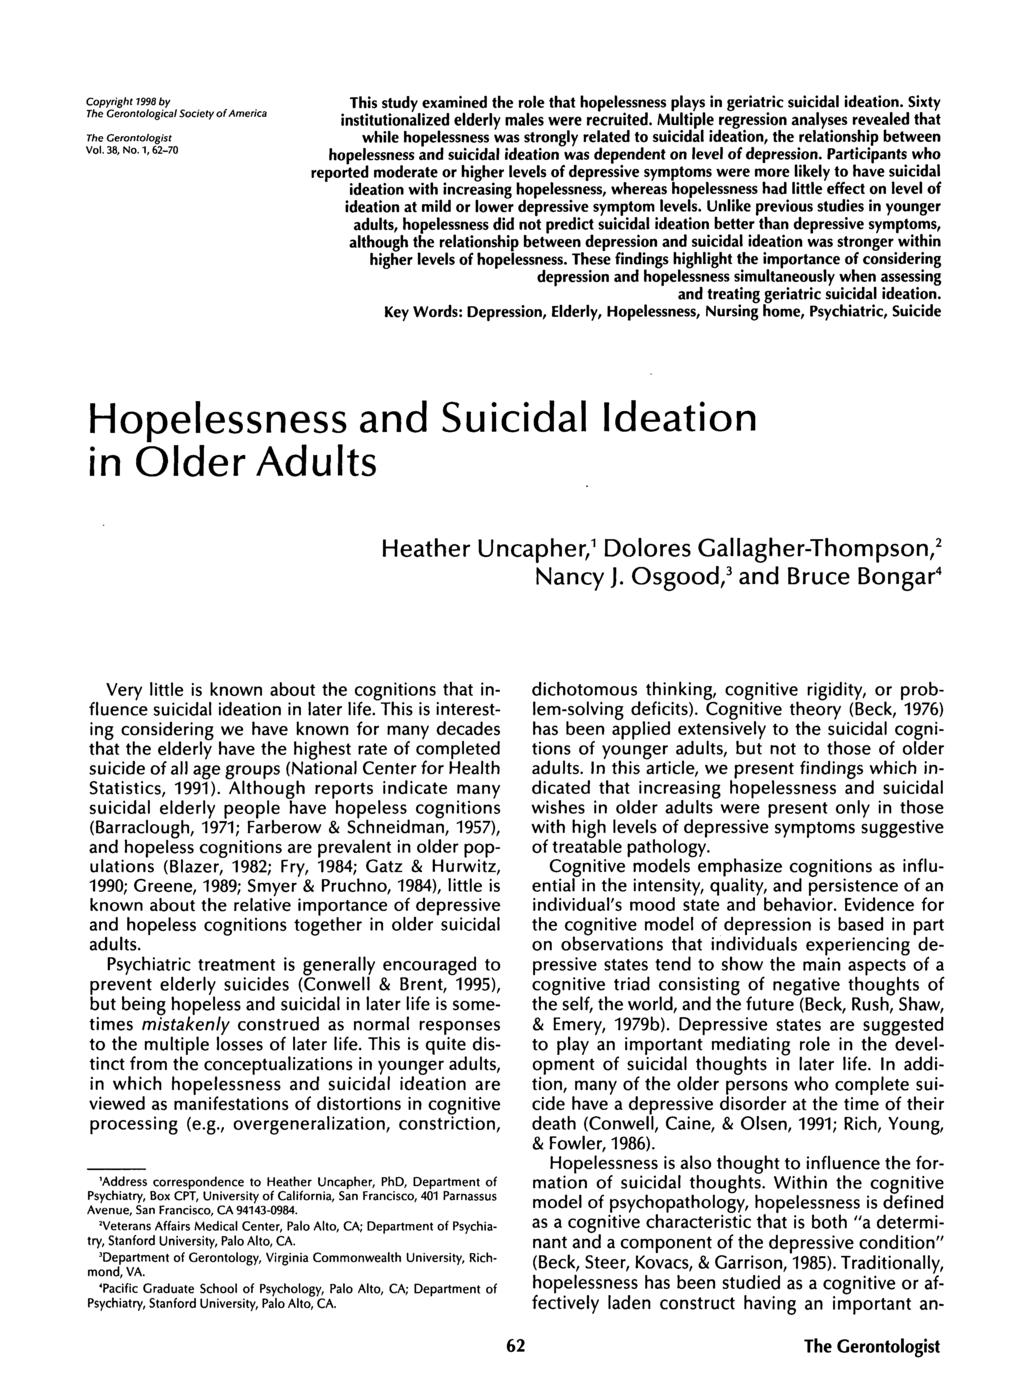 Copyright 1998 by The Cerontological Society of America The Cerontologist Vol. 38, No. 1,62-70 This study examined the role that hopelessness plays in geriatric suicidal ideation.